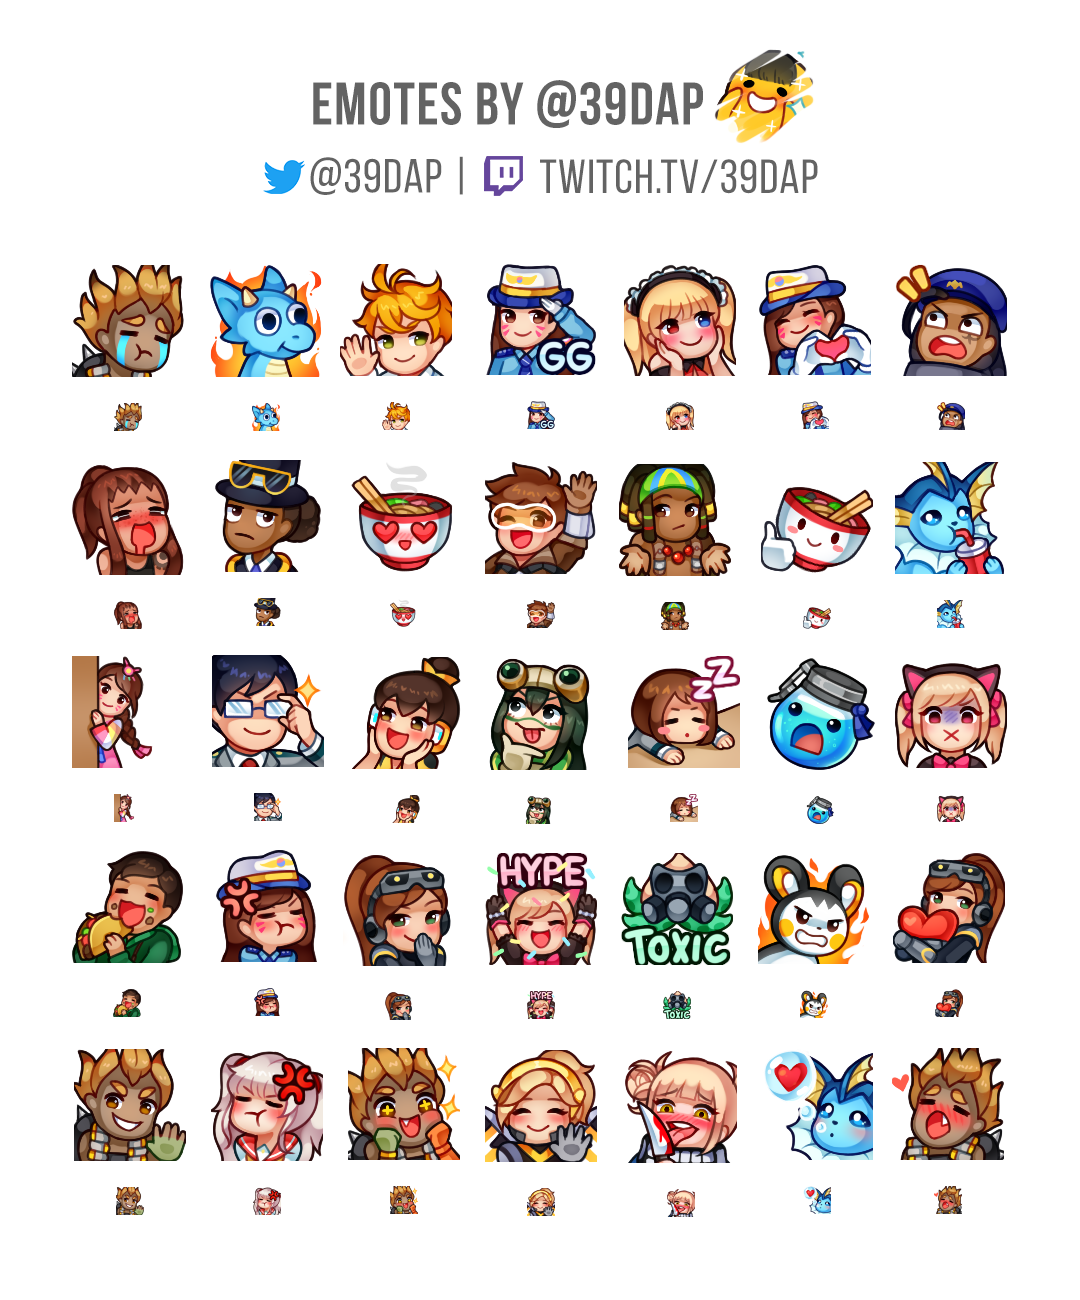 daph on Twitter: "commissions are closed now but heres a new emotes co...